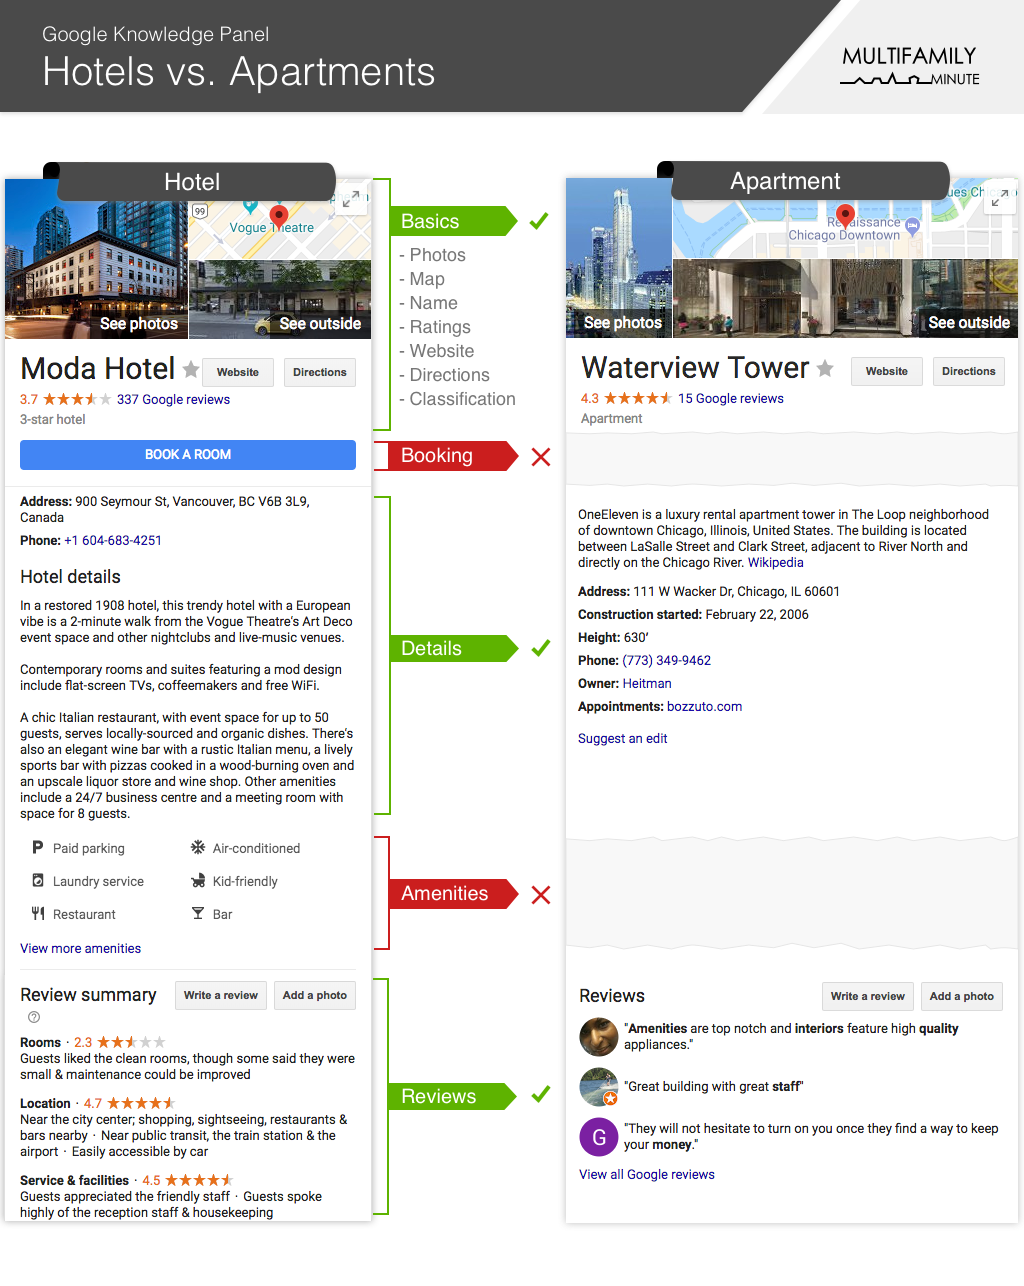 Google Knowledge Graph for Hotels vs. Apartments